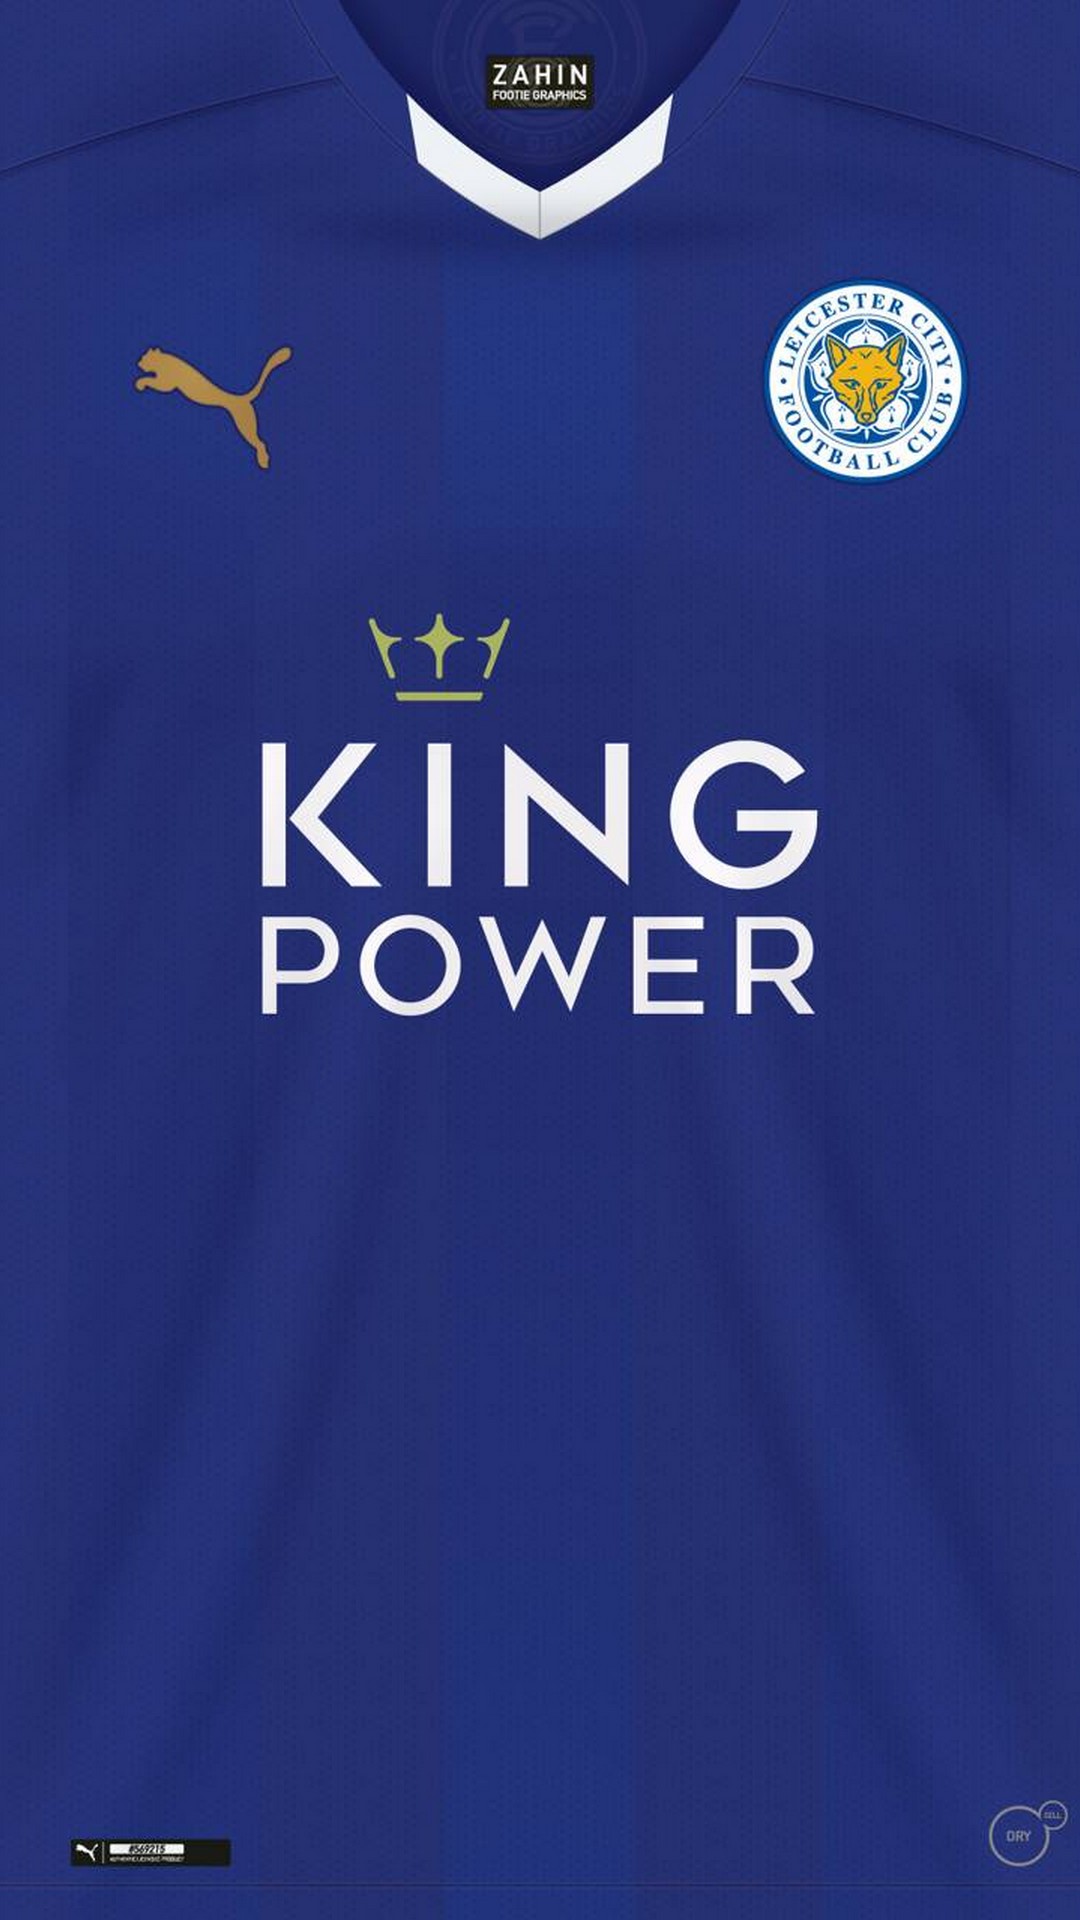 Leicester City FC HD Wallpaper For iPhone With high-resolution 1080X1920 pixel. You can use this wallpaper for your Desktop Computers, Mac Screensavers, Windows Backgrounds, iPhone Wallpapers, Tablet or Android Lock screen and another Mobile device